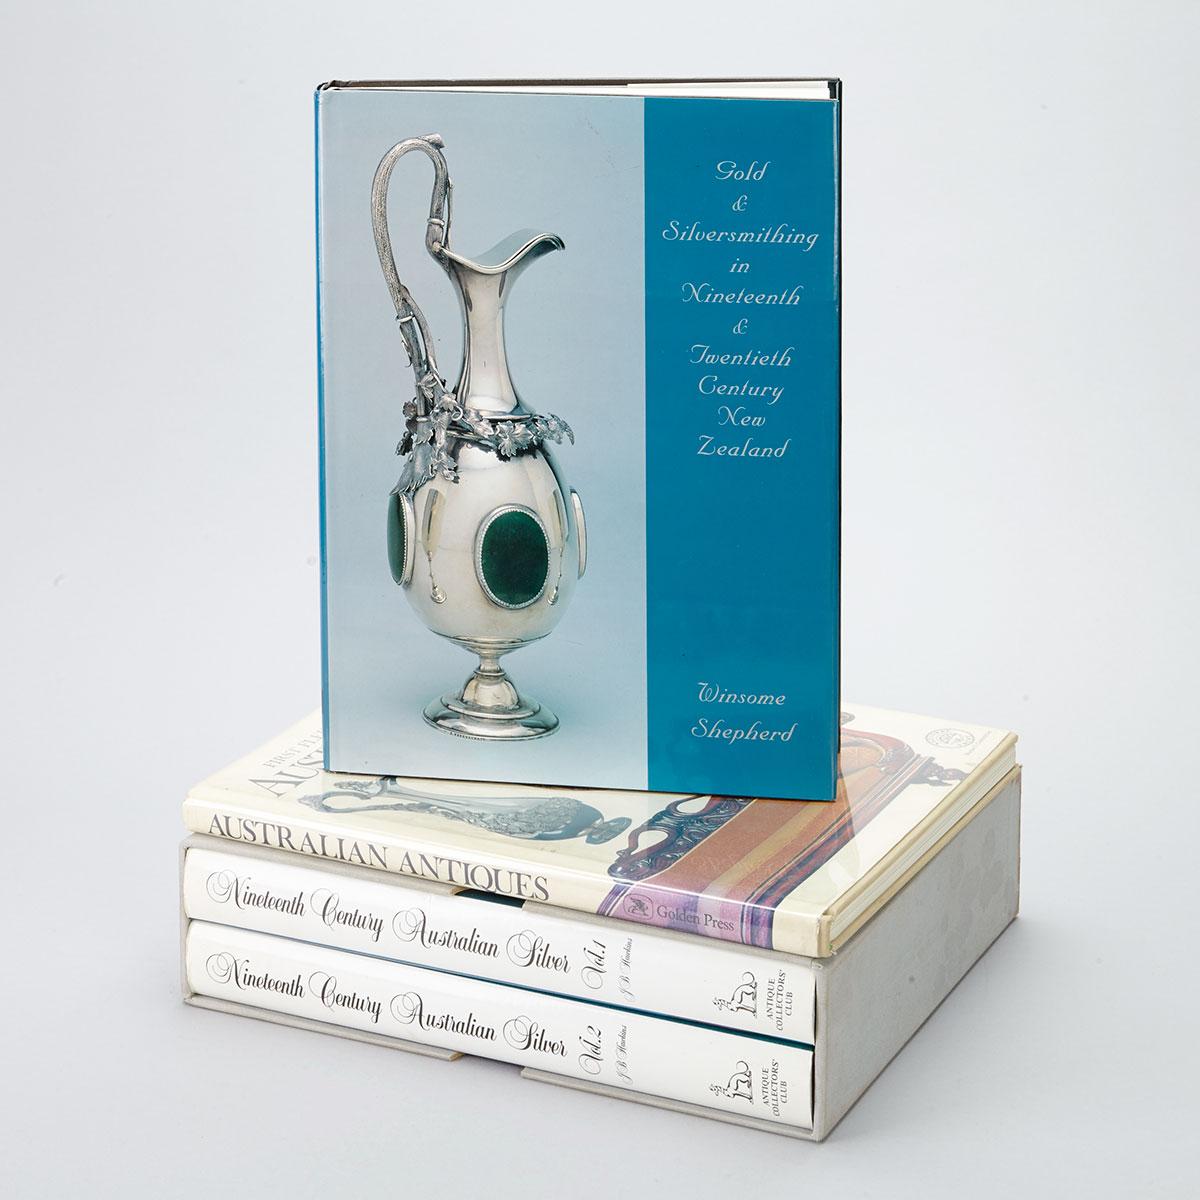 [Reference Books] Australian and New Zealand Silver, Four Volumes